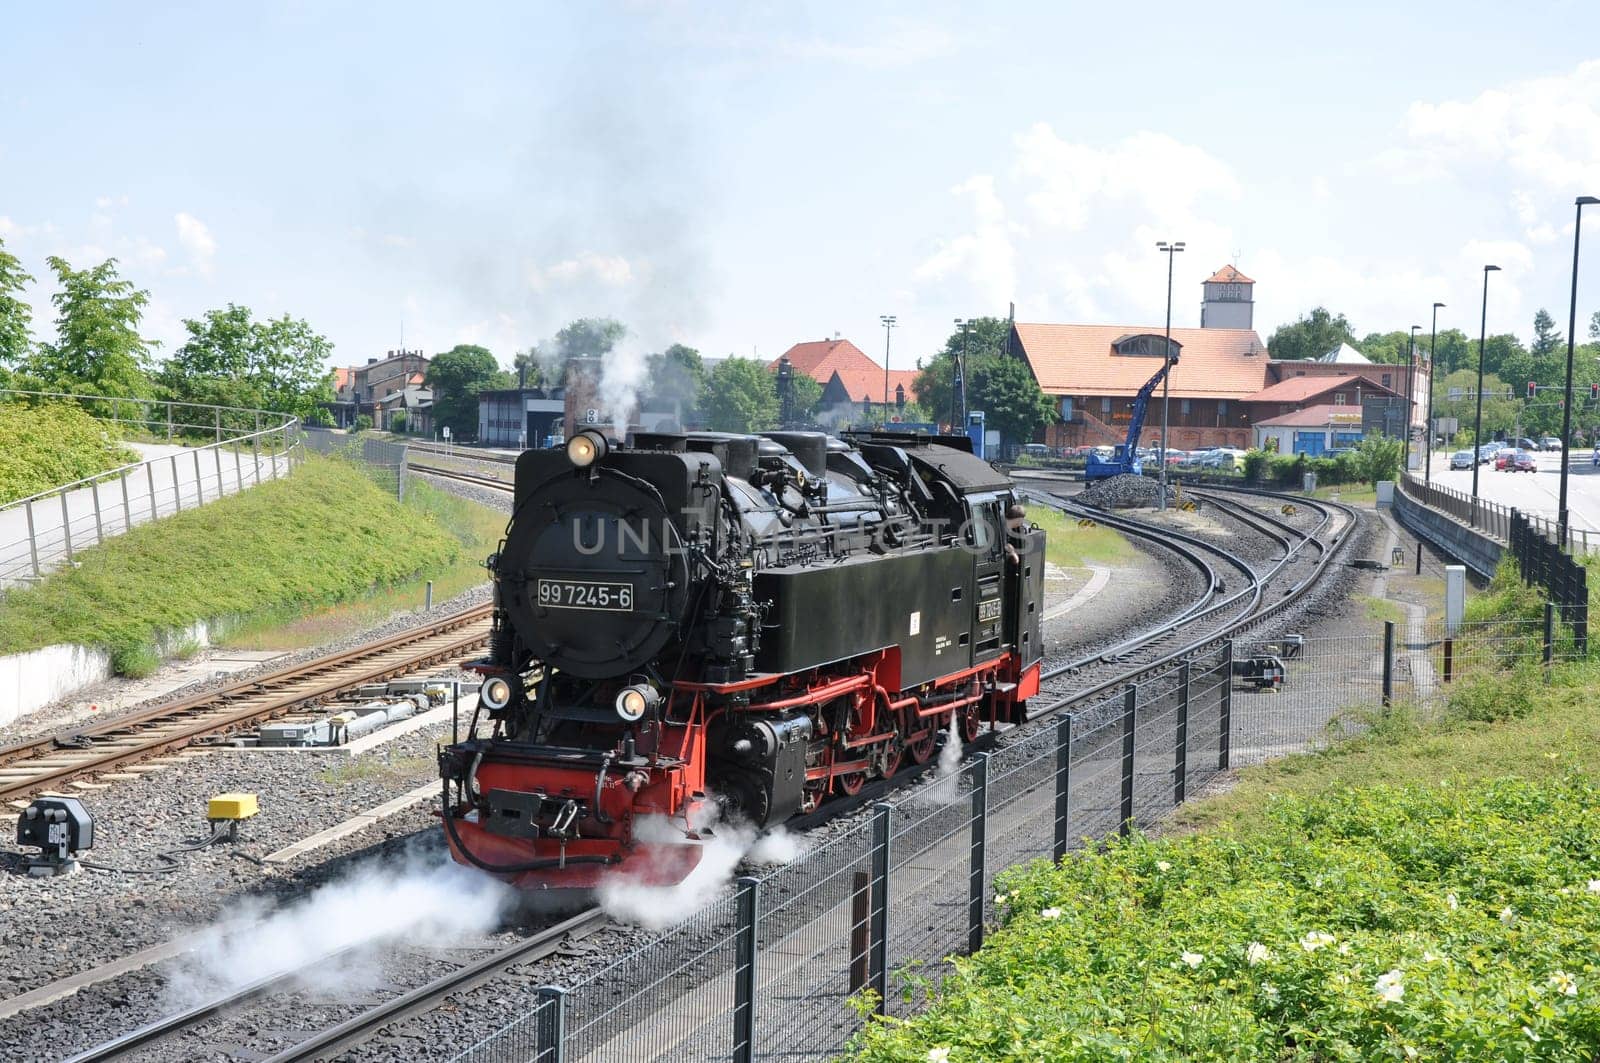 Scenic shot of the Harz Narrow Gauge Railways steam locomotive at the Wernigerode station in Germany